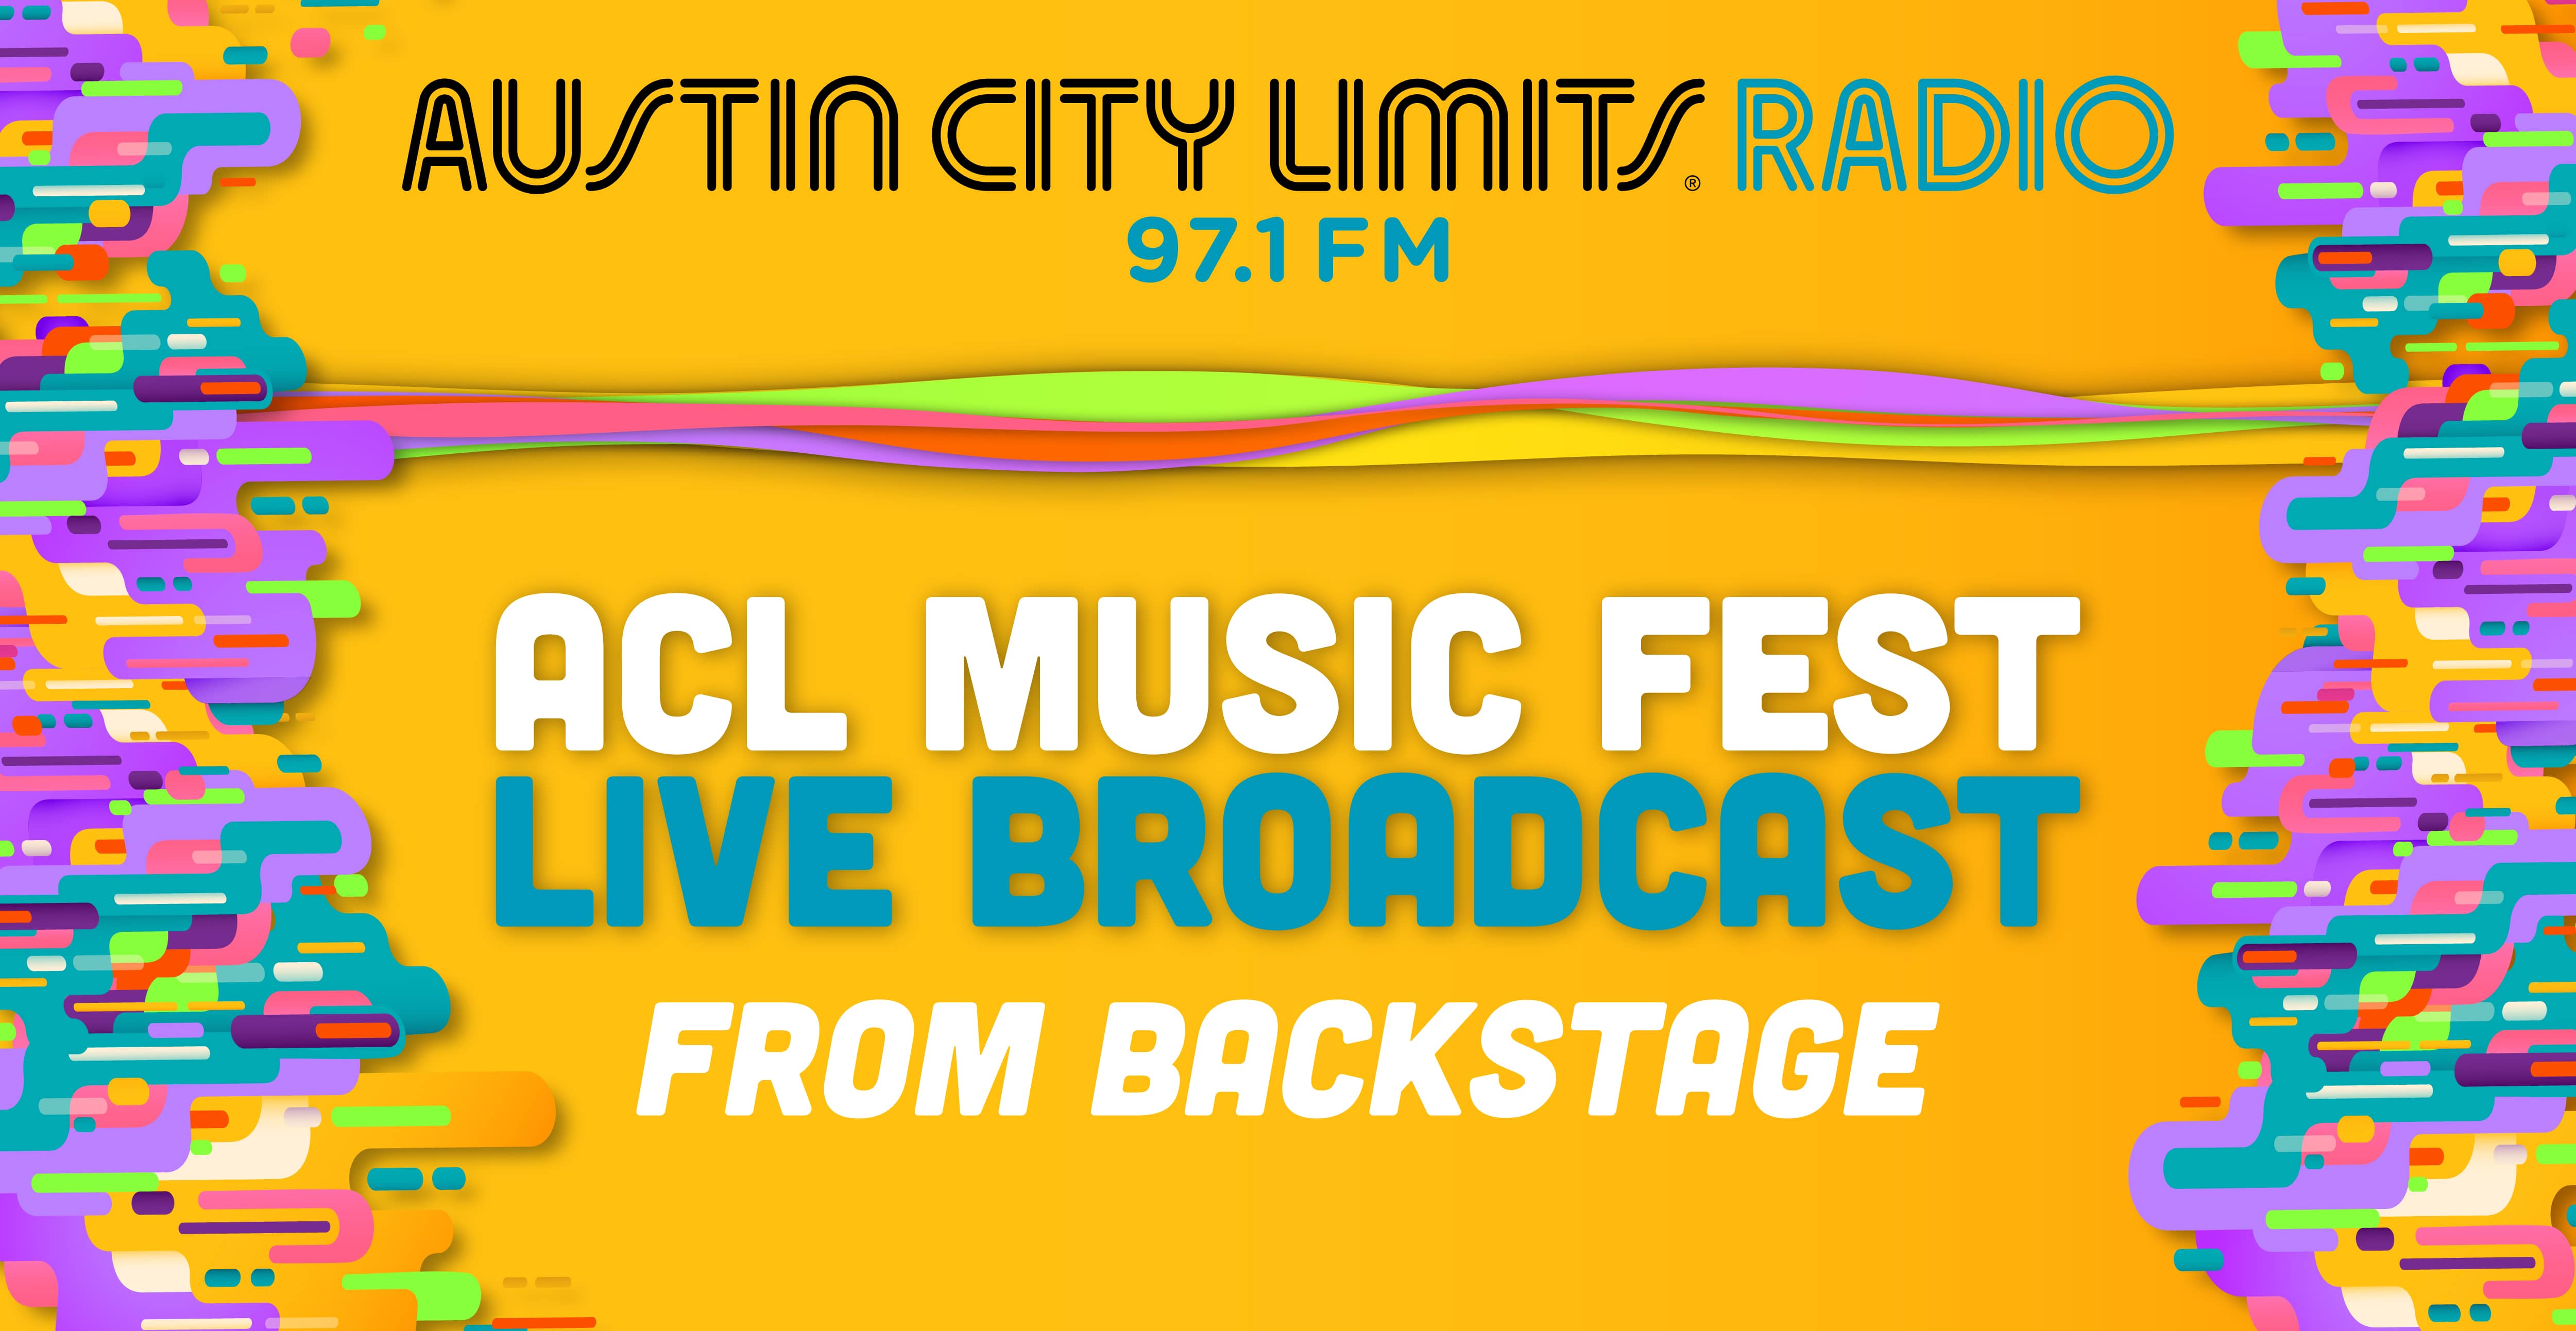 ACL Music Fest Live Broadcast